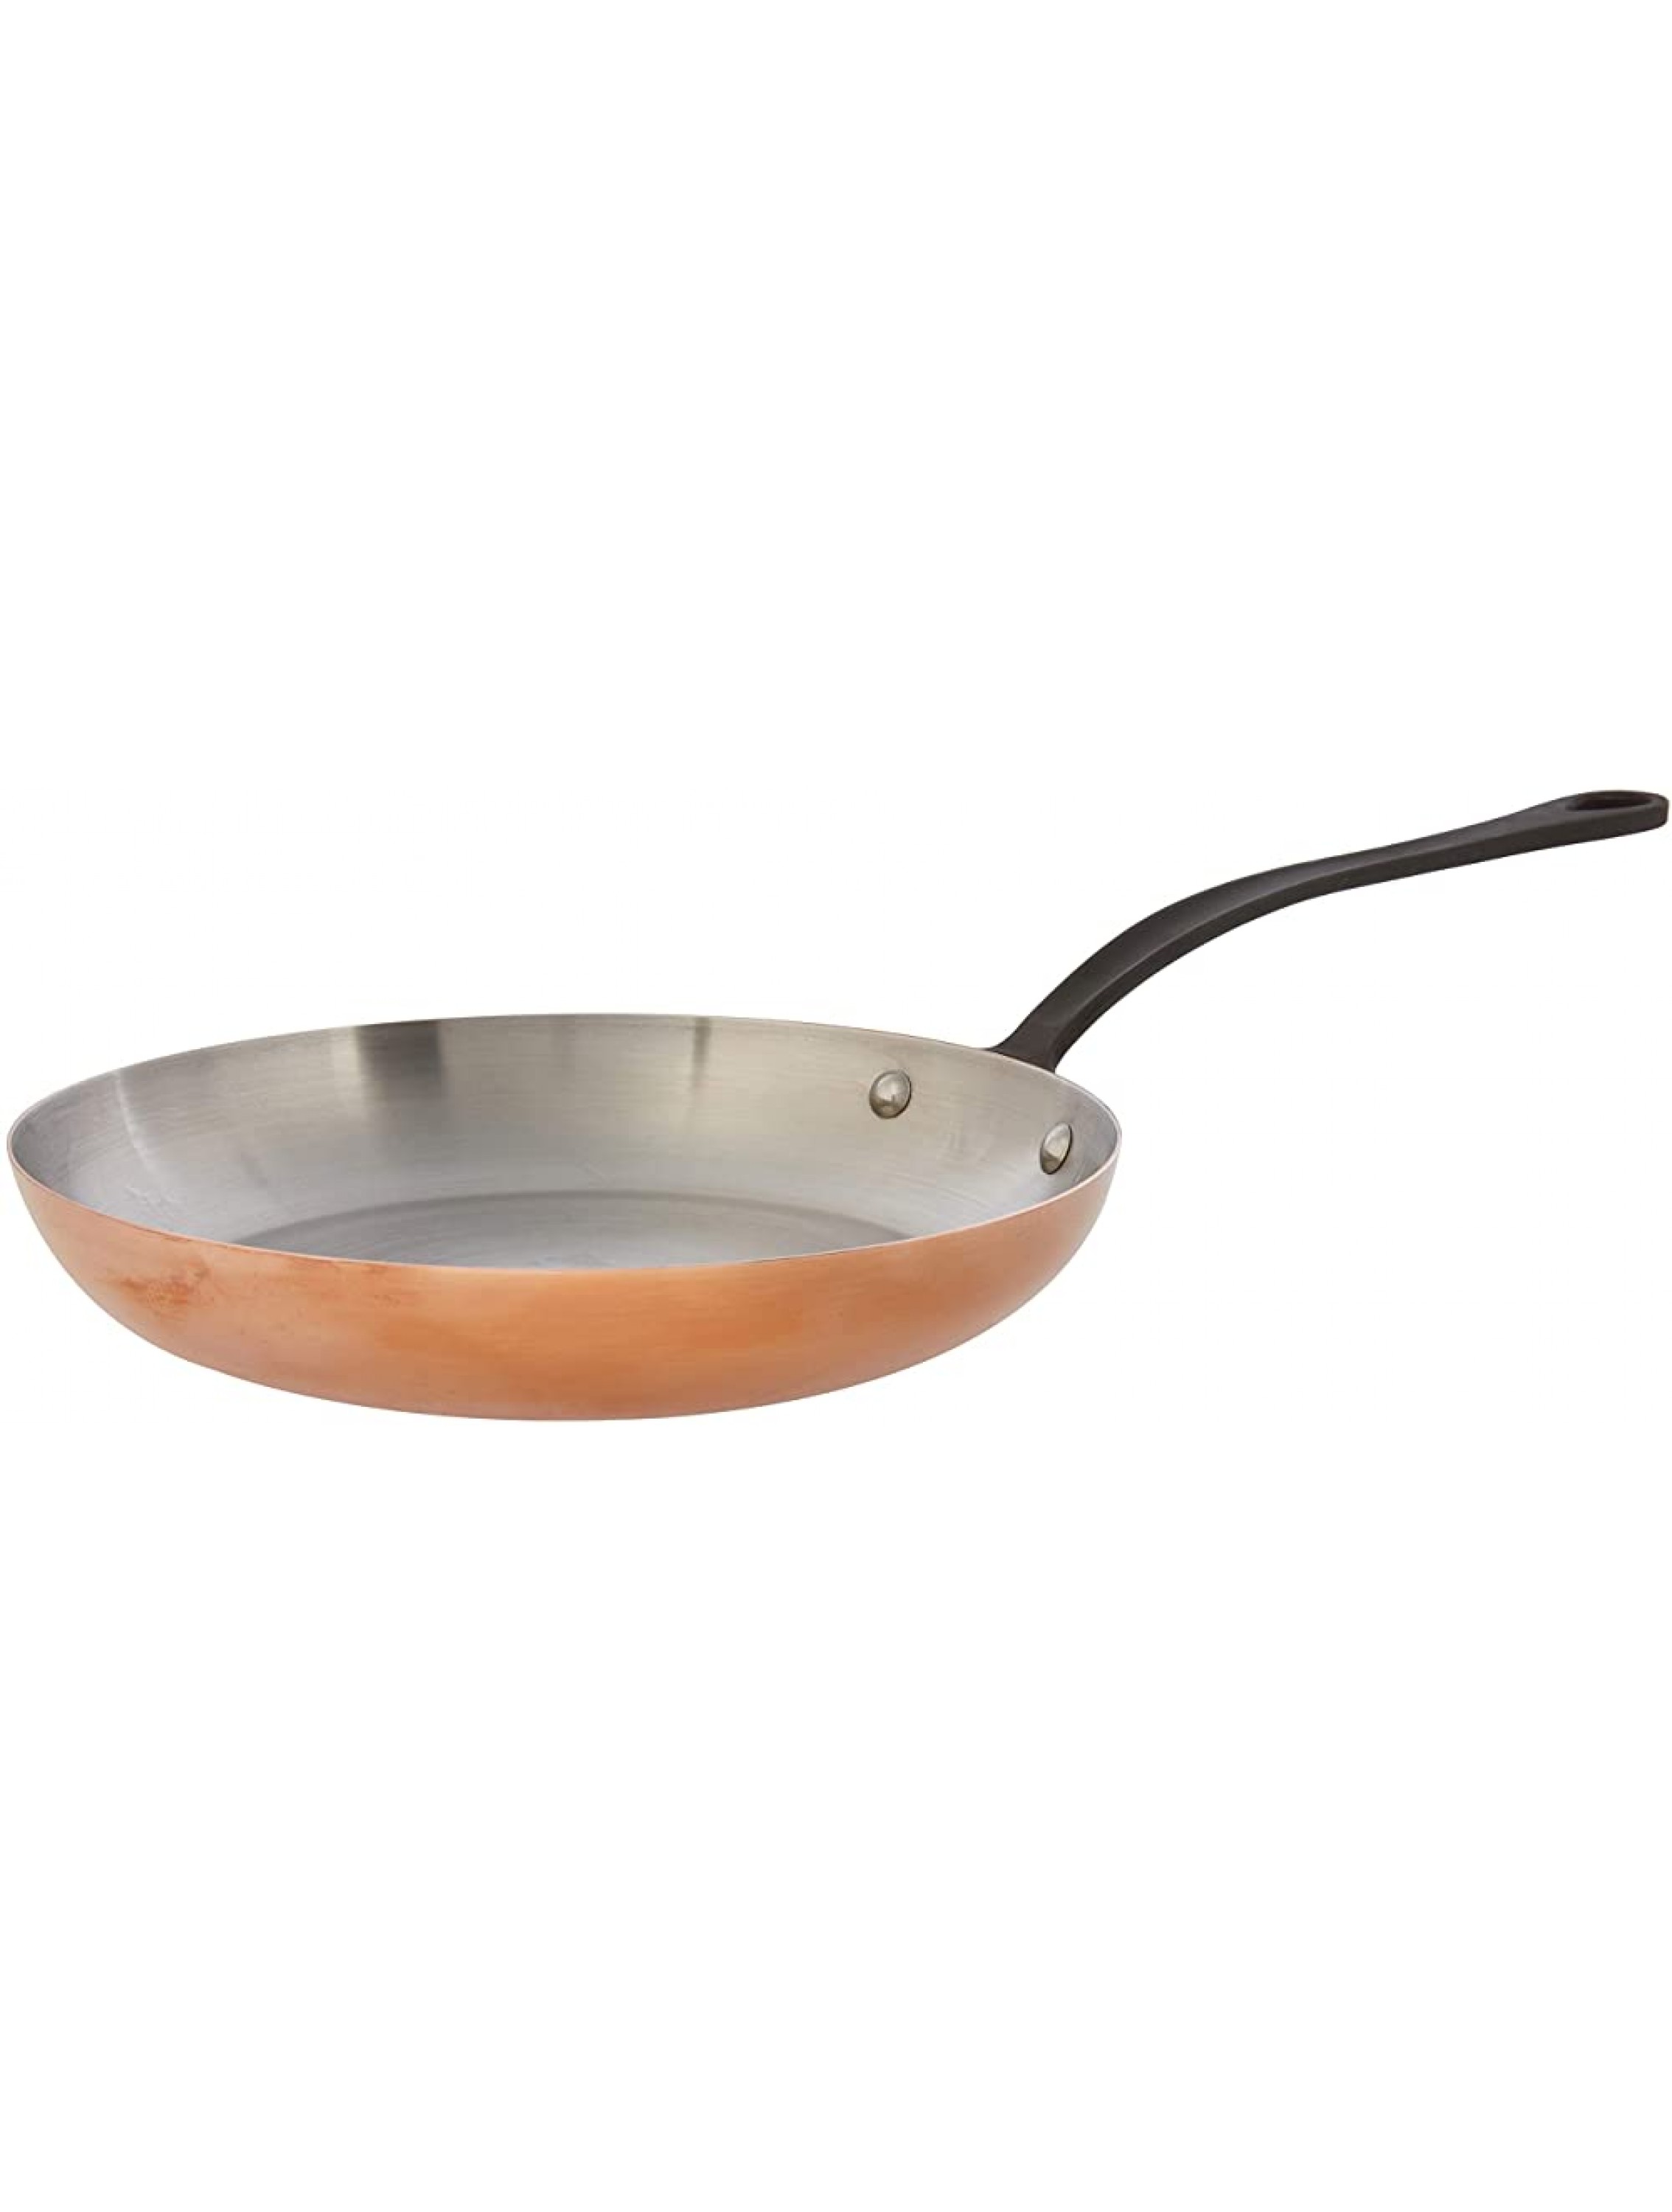 Mauviel M'Heritage M150C Copper Frying Pan 10.2 26cm with Cast Stainless Steel Iron Eletroplated Handle - B7QEENHSK